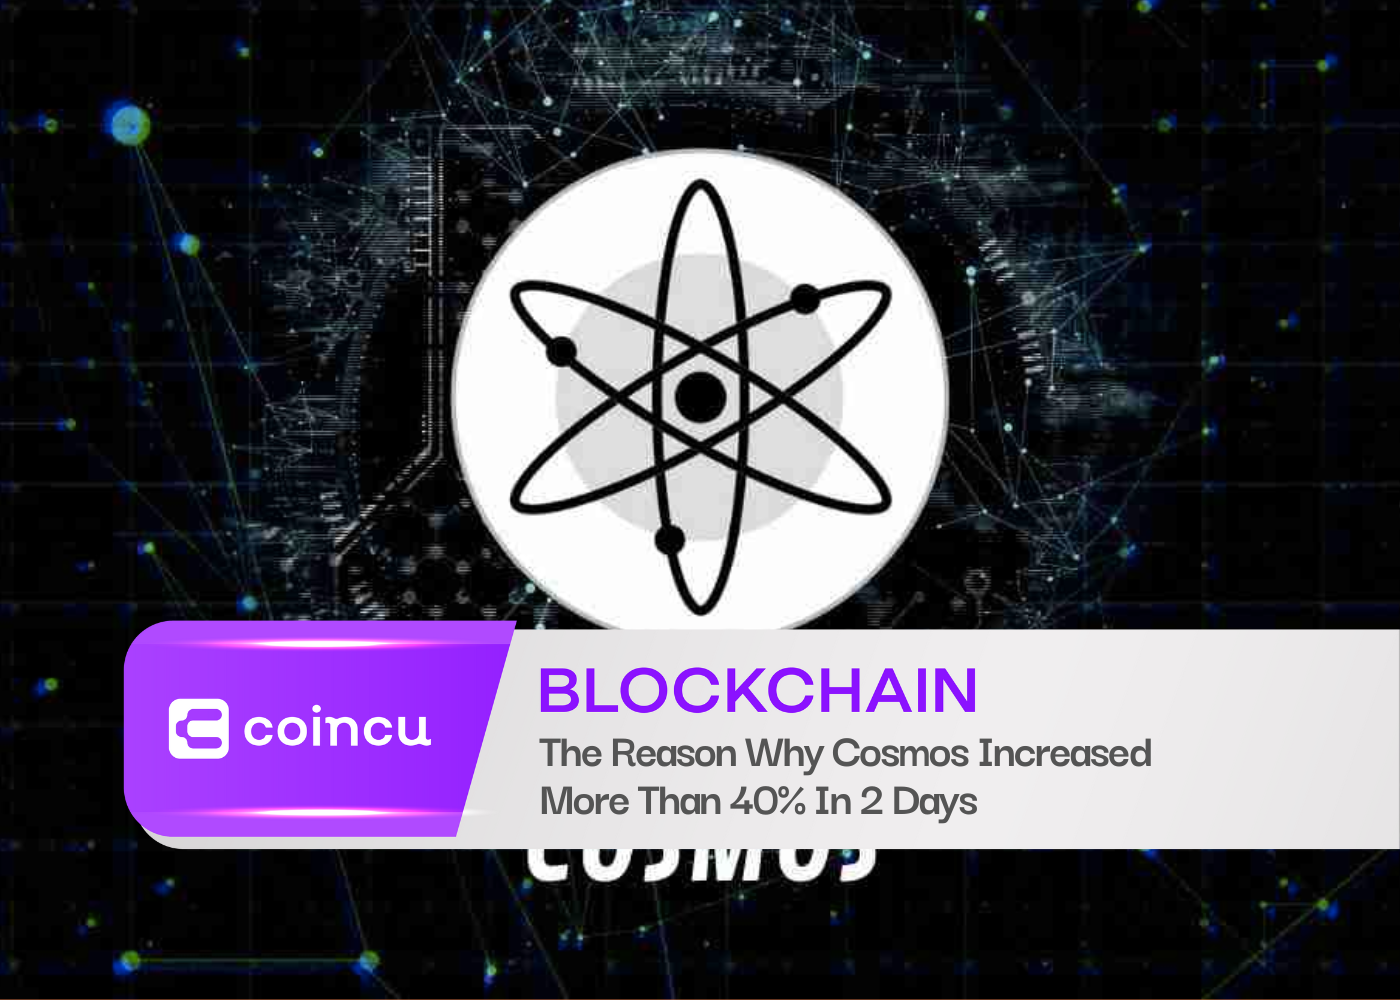 The Reason Why Cosmos Increased More Than 40% In 2 Days